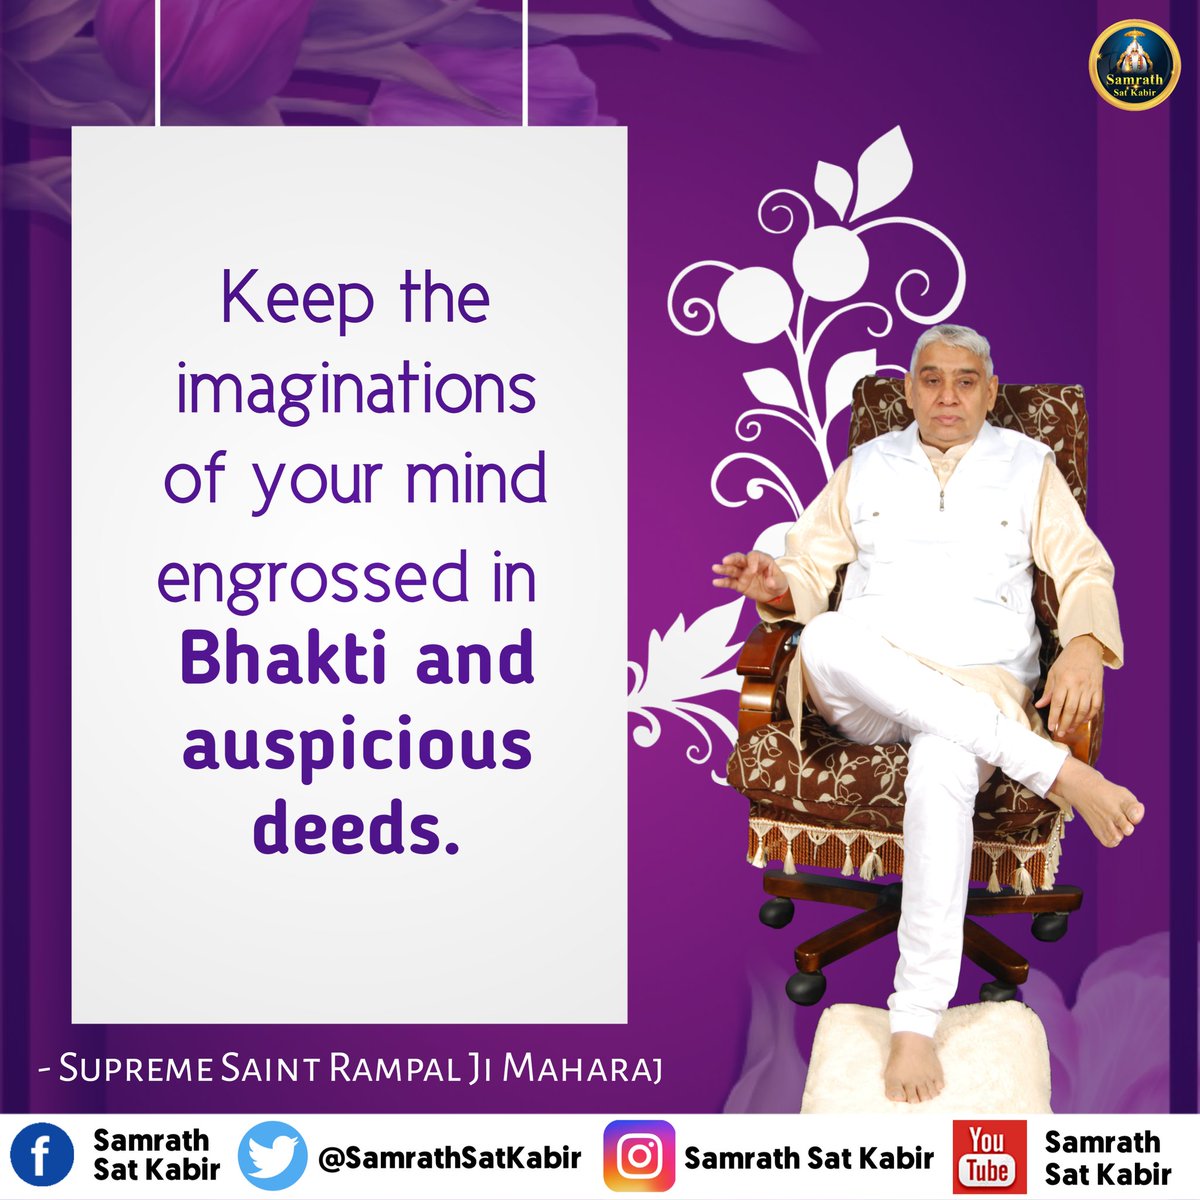 #GodNightMonday 
Keep the imaginations
of your mind engrossed in Bhakti and auspicious deeds.
~ Supreme SatGuru Saint Rampal Ji Maharaj
Must Watch Sadhna tv7:30 PM
Visit our Saint Rampal Ji Maharaj YouTube Channel for More Information
#MondayMotivation